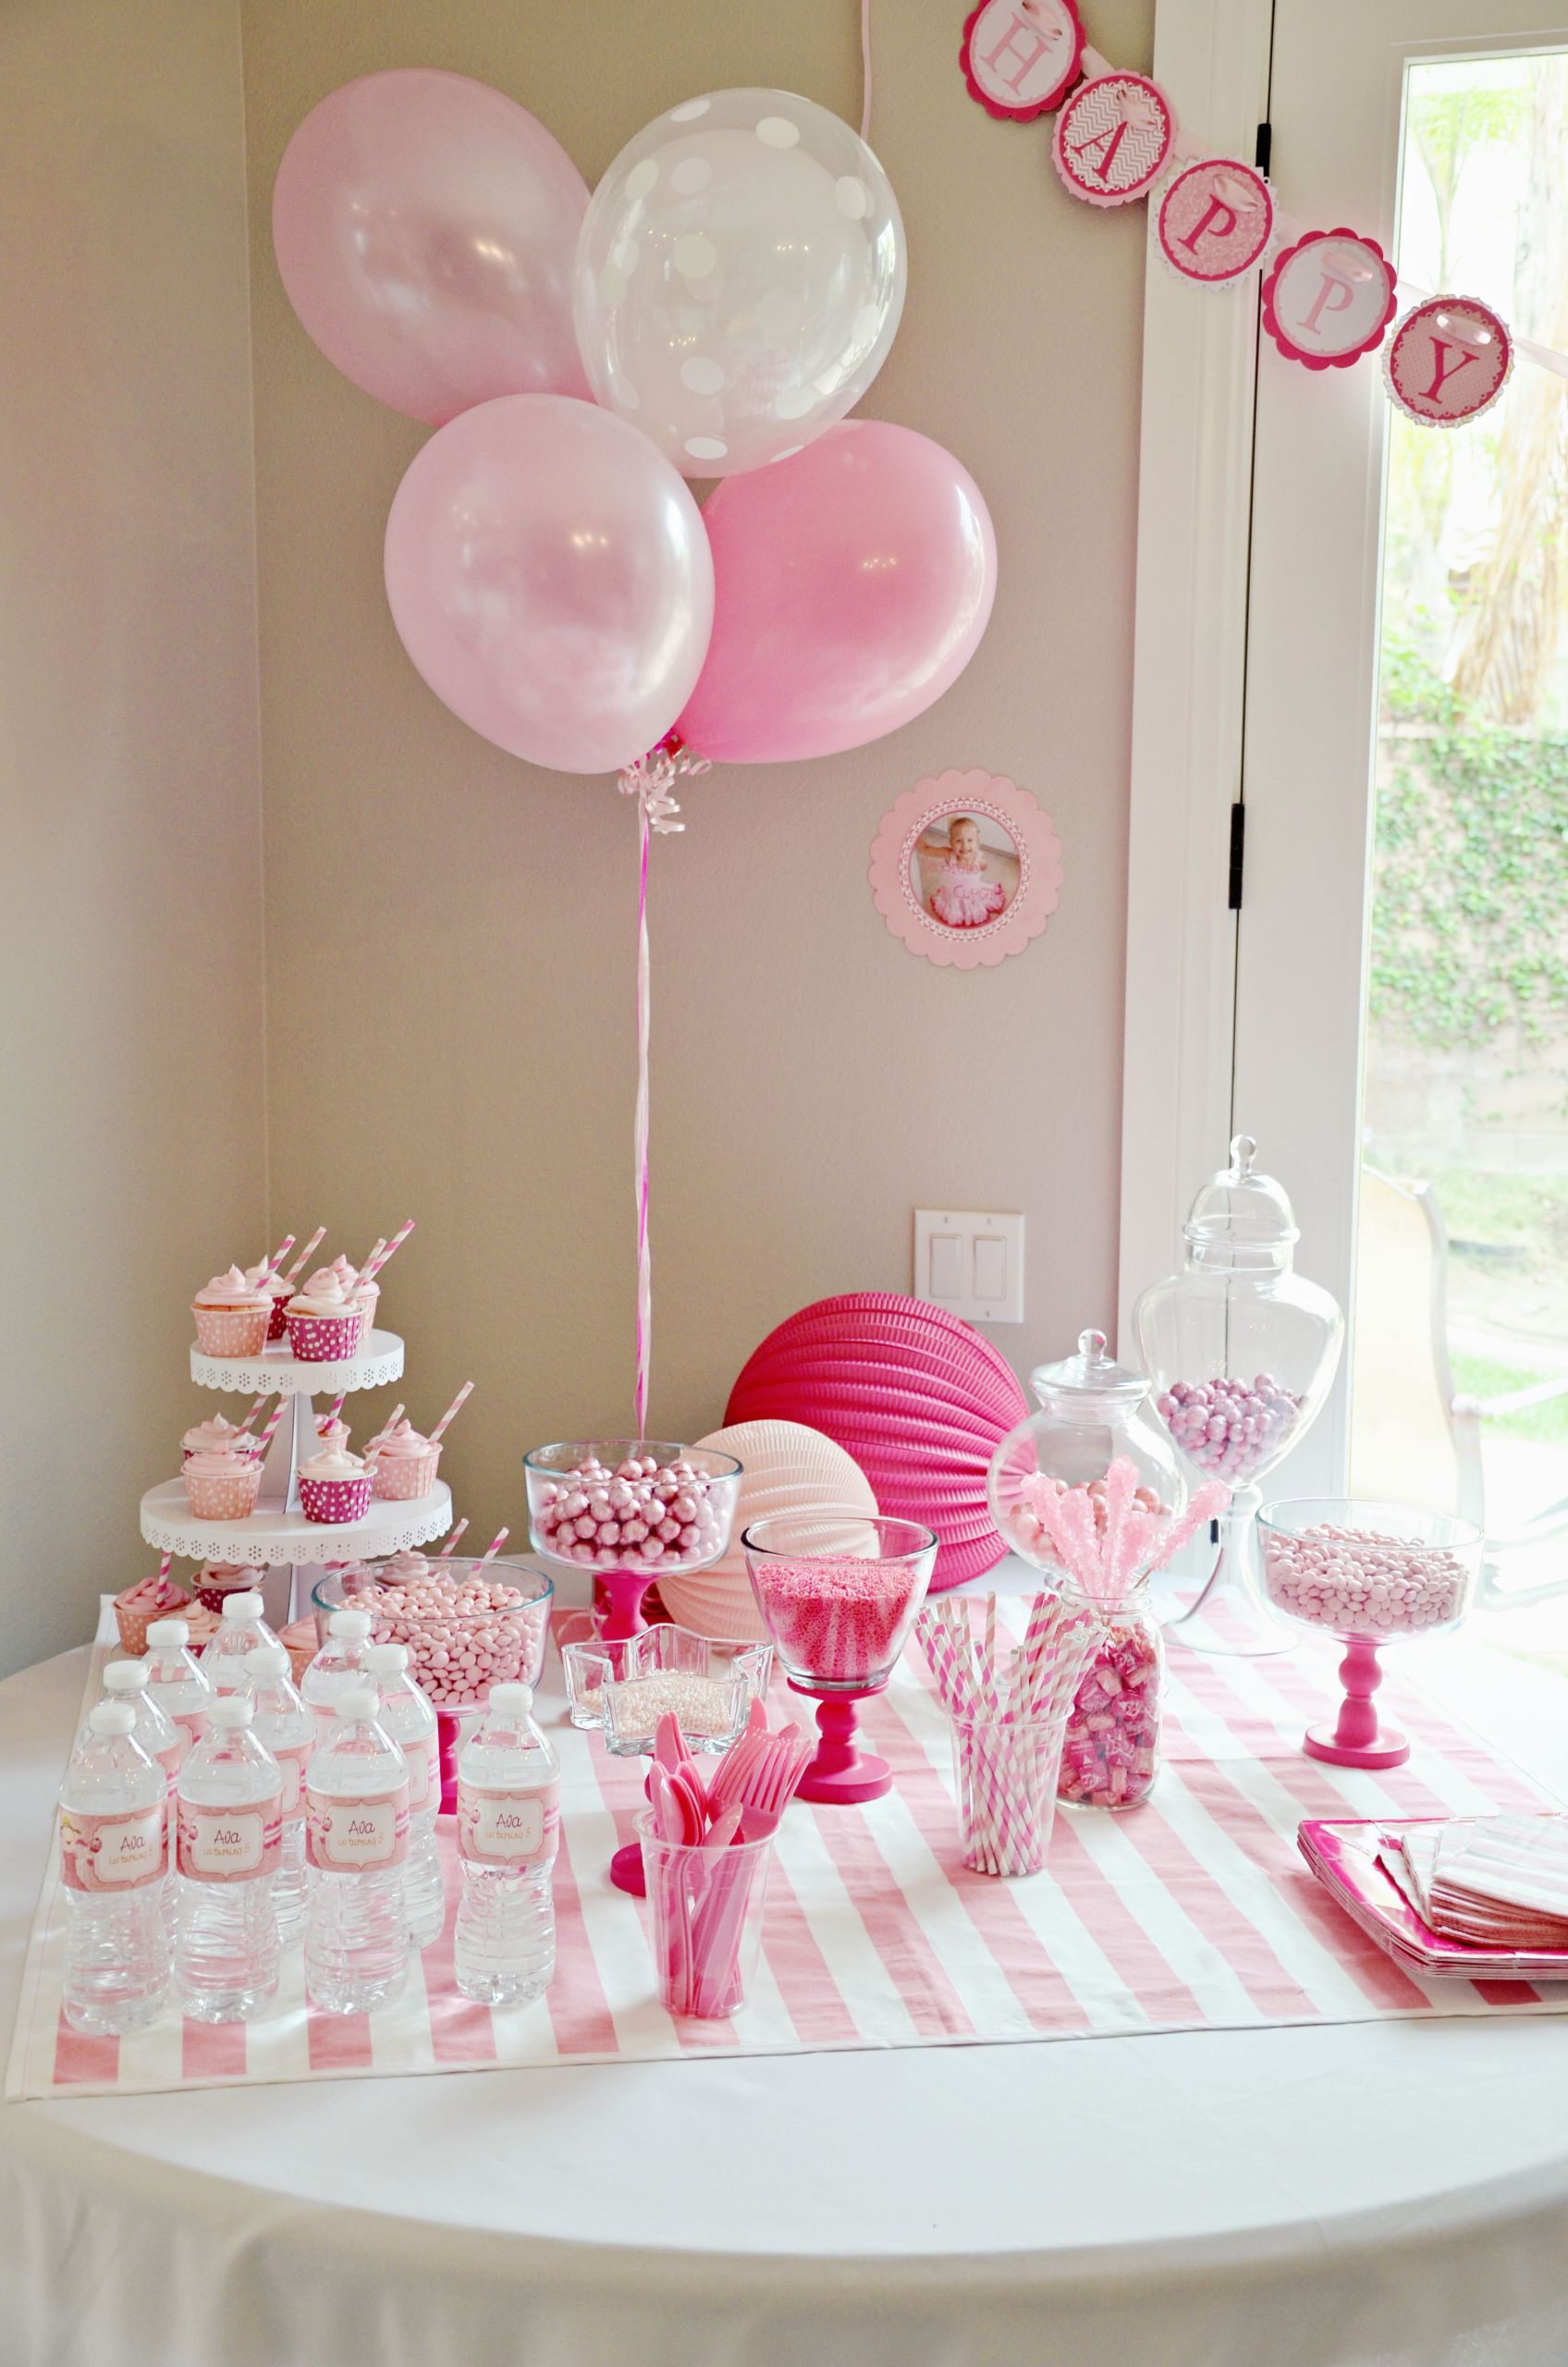 Food Ideas For 3 Year Old Birthday Party
 Birthday Ideas For 3 Yr Old Girl